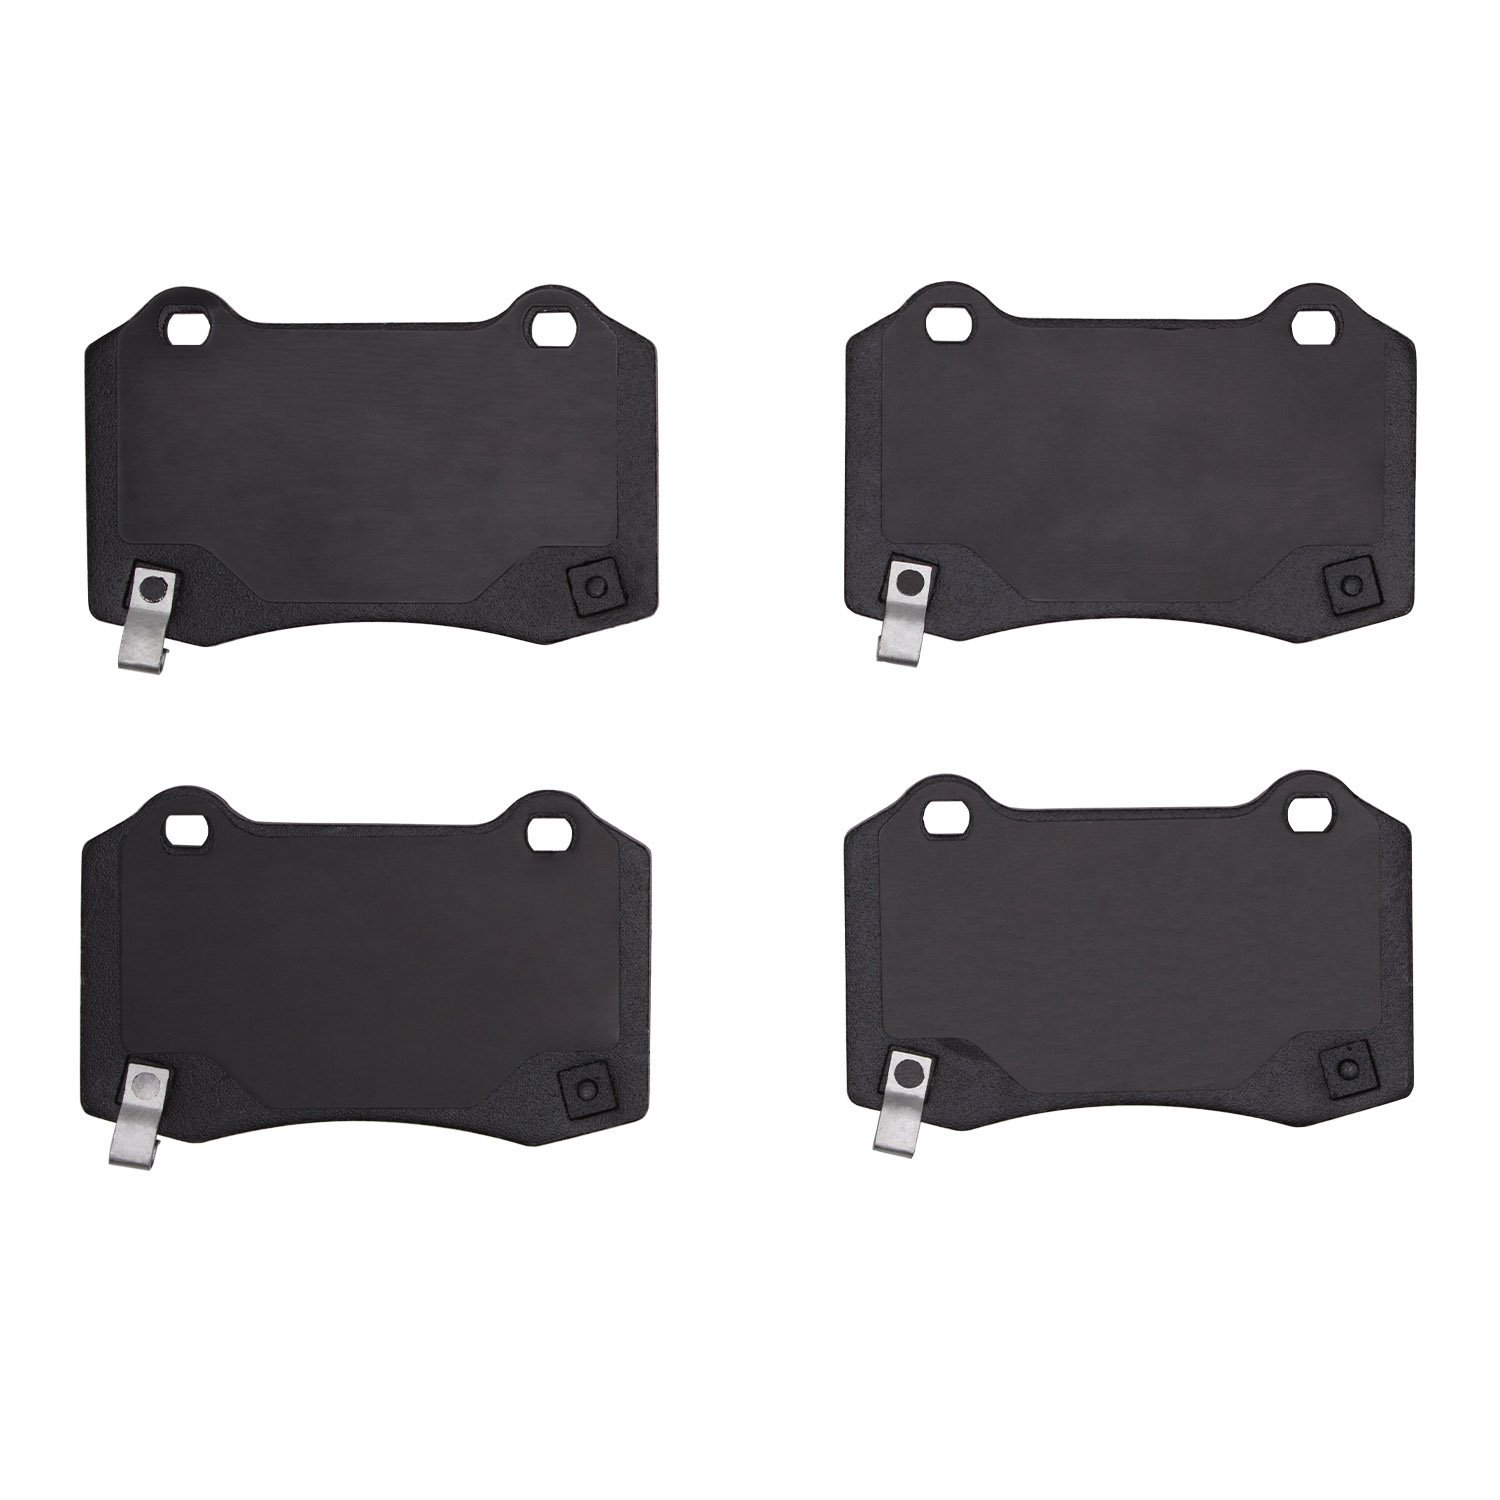 1551-1053-00 5000 Advanced Low-Metallic Brake Pads, Fits Select Multiple Makes/Models, Position: Rear